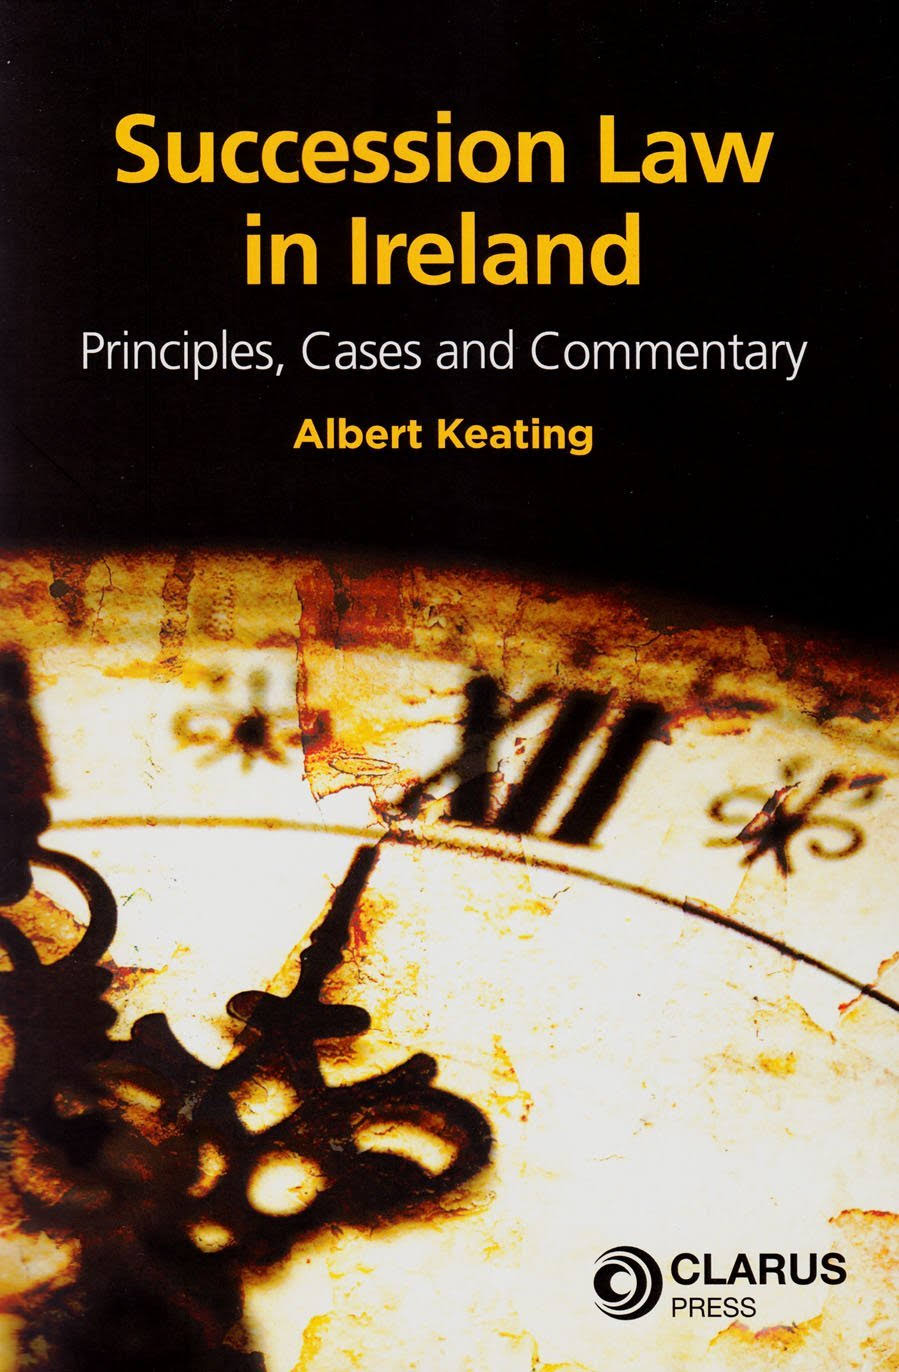 Succession Law in Ireland by Albert Keating